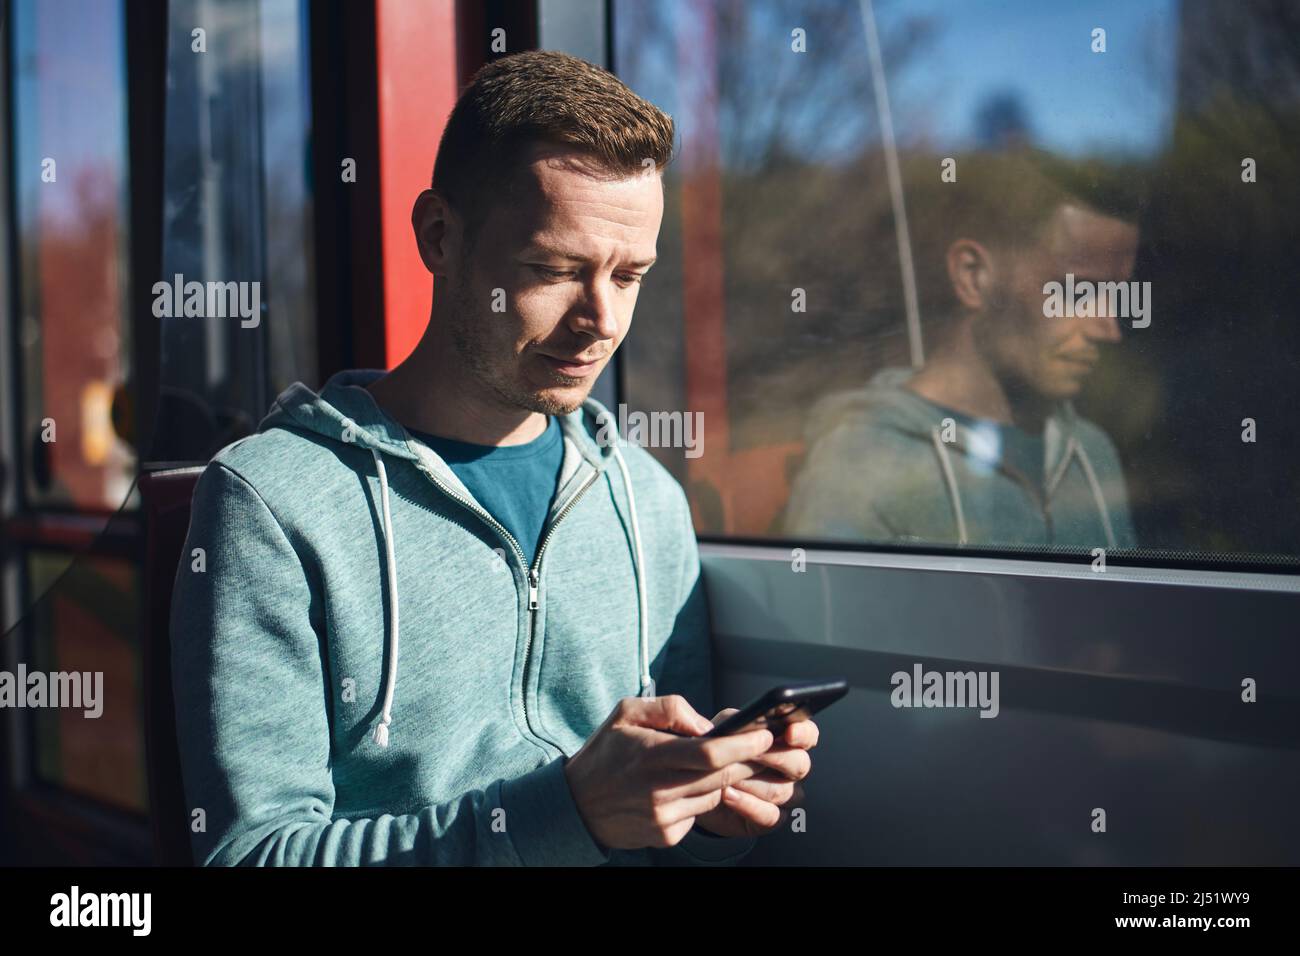 Man using phone while commuting by tram of public transportation. Stock Photo